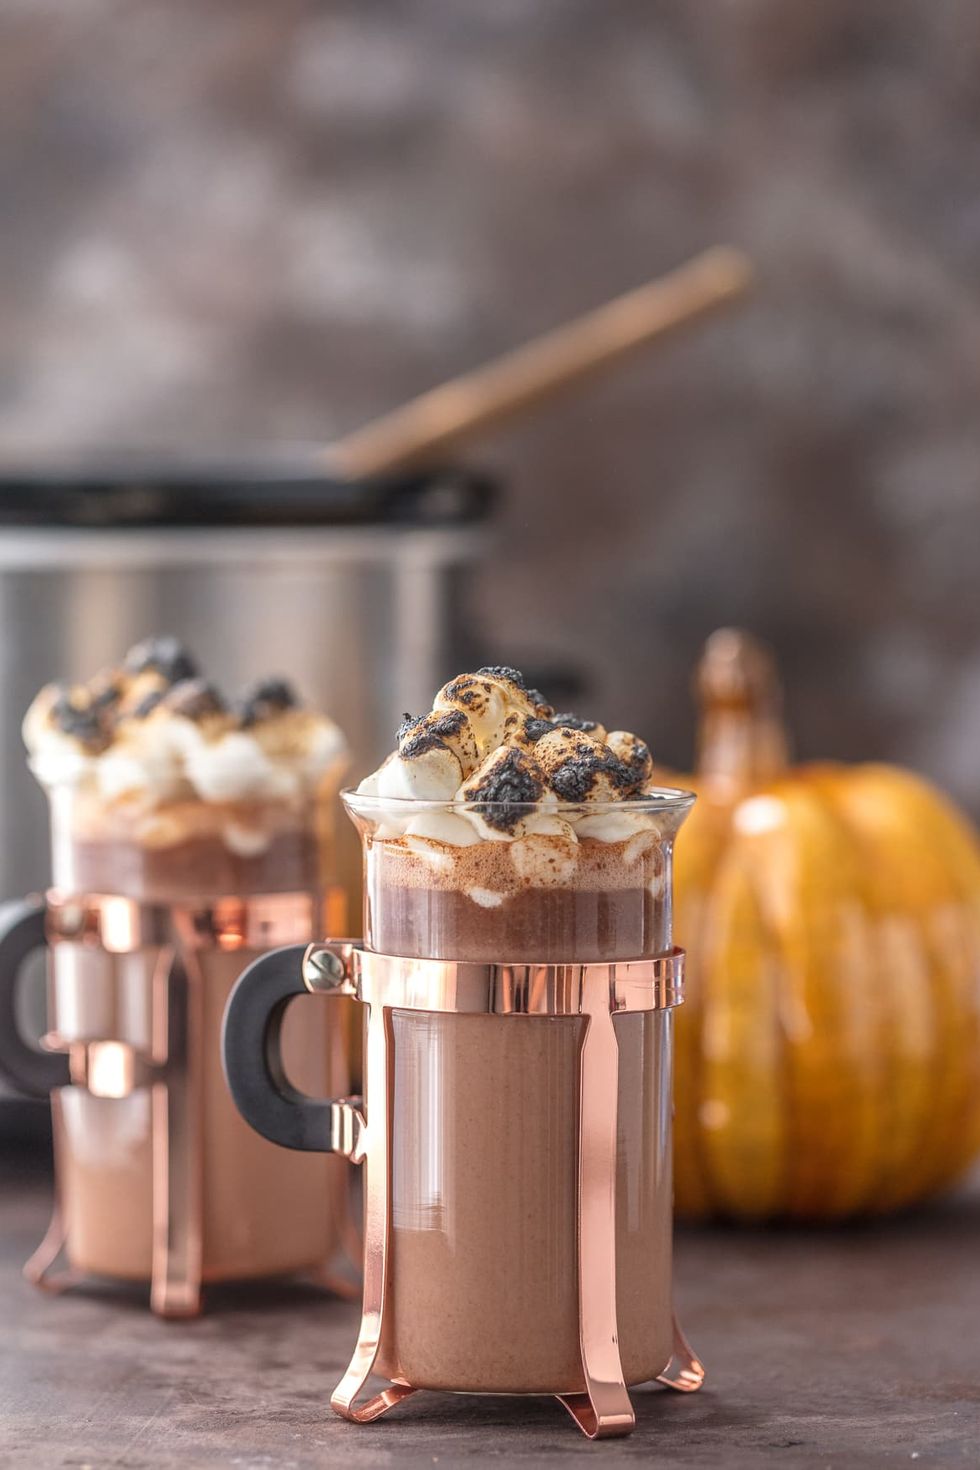 Decadent Slow Cooker Hot Chocolate - Sally's Baking Addiction